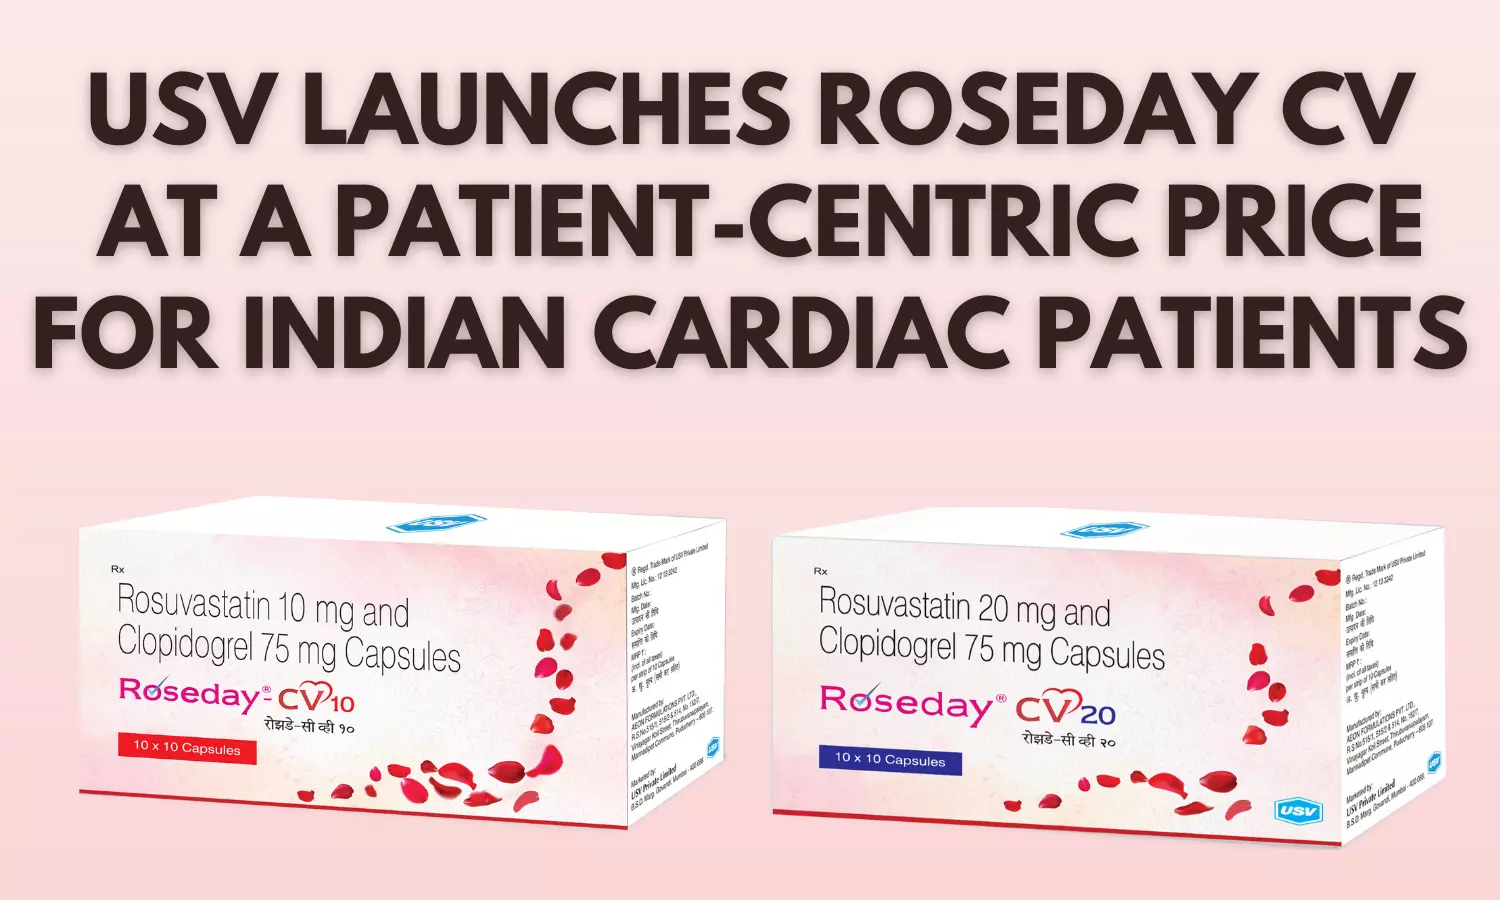 USV Launches Roseday CV at a Patient-Centric Price for Indian Cardiac Patients